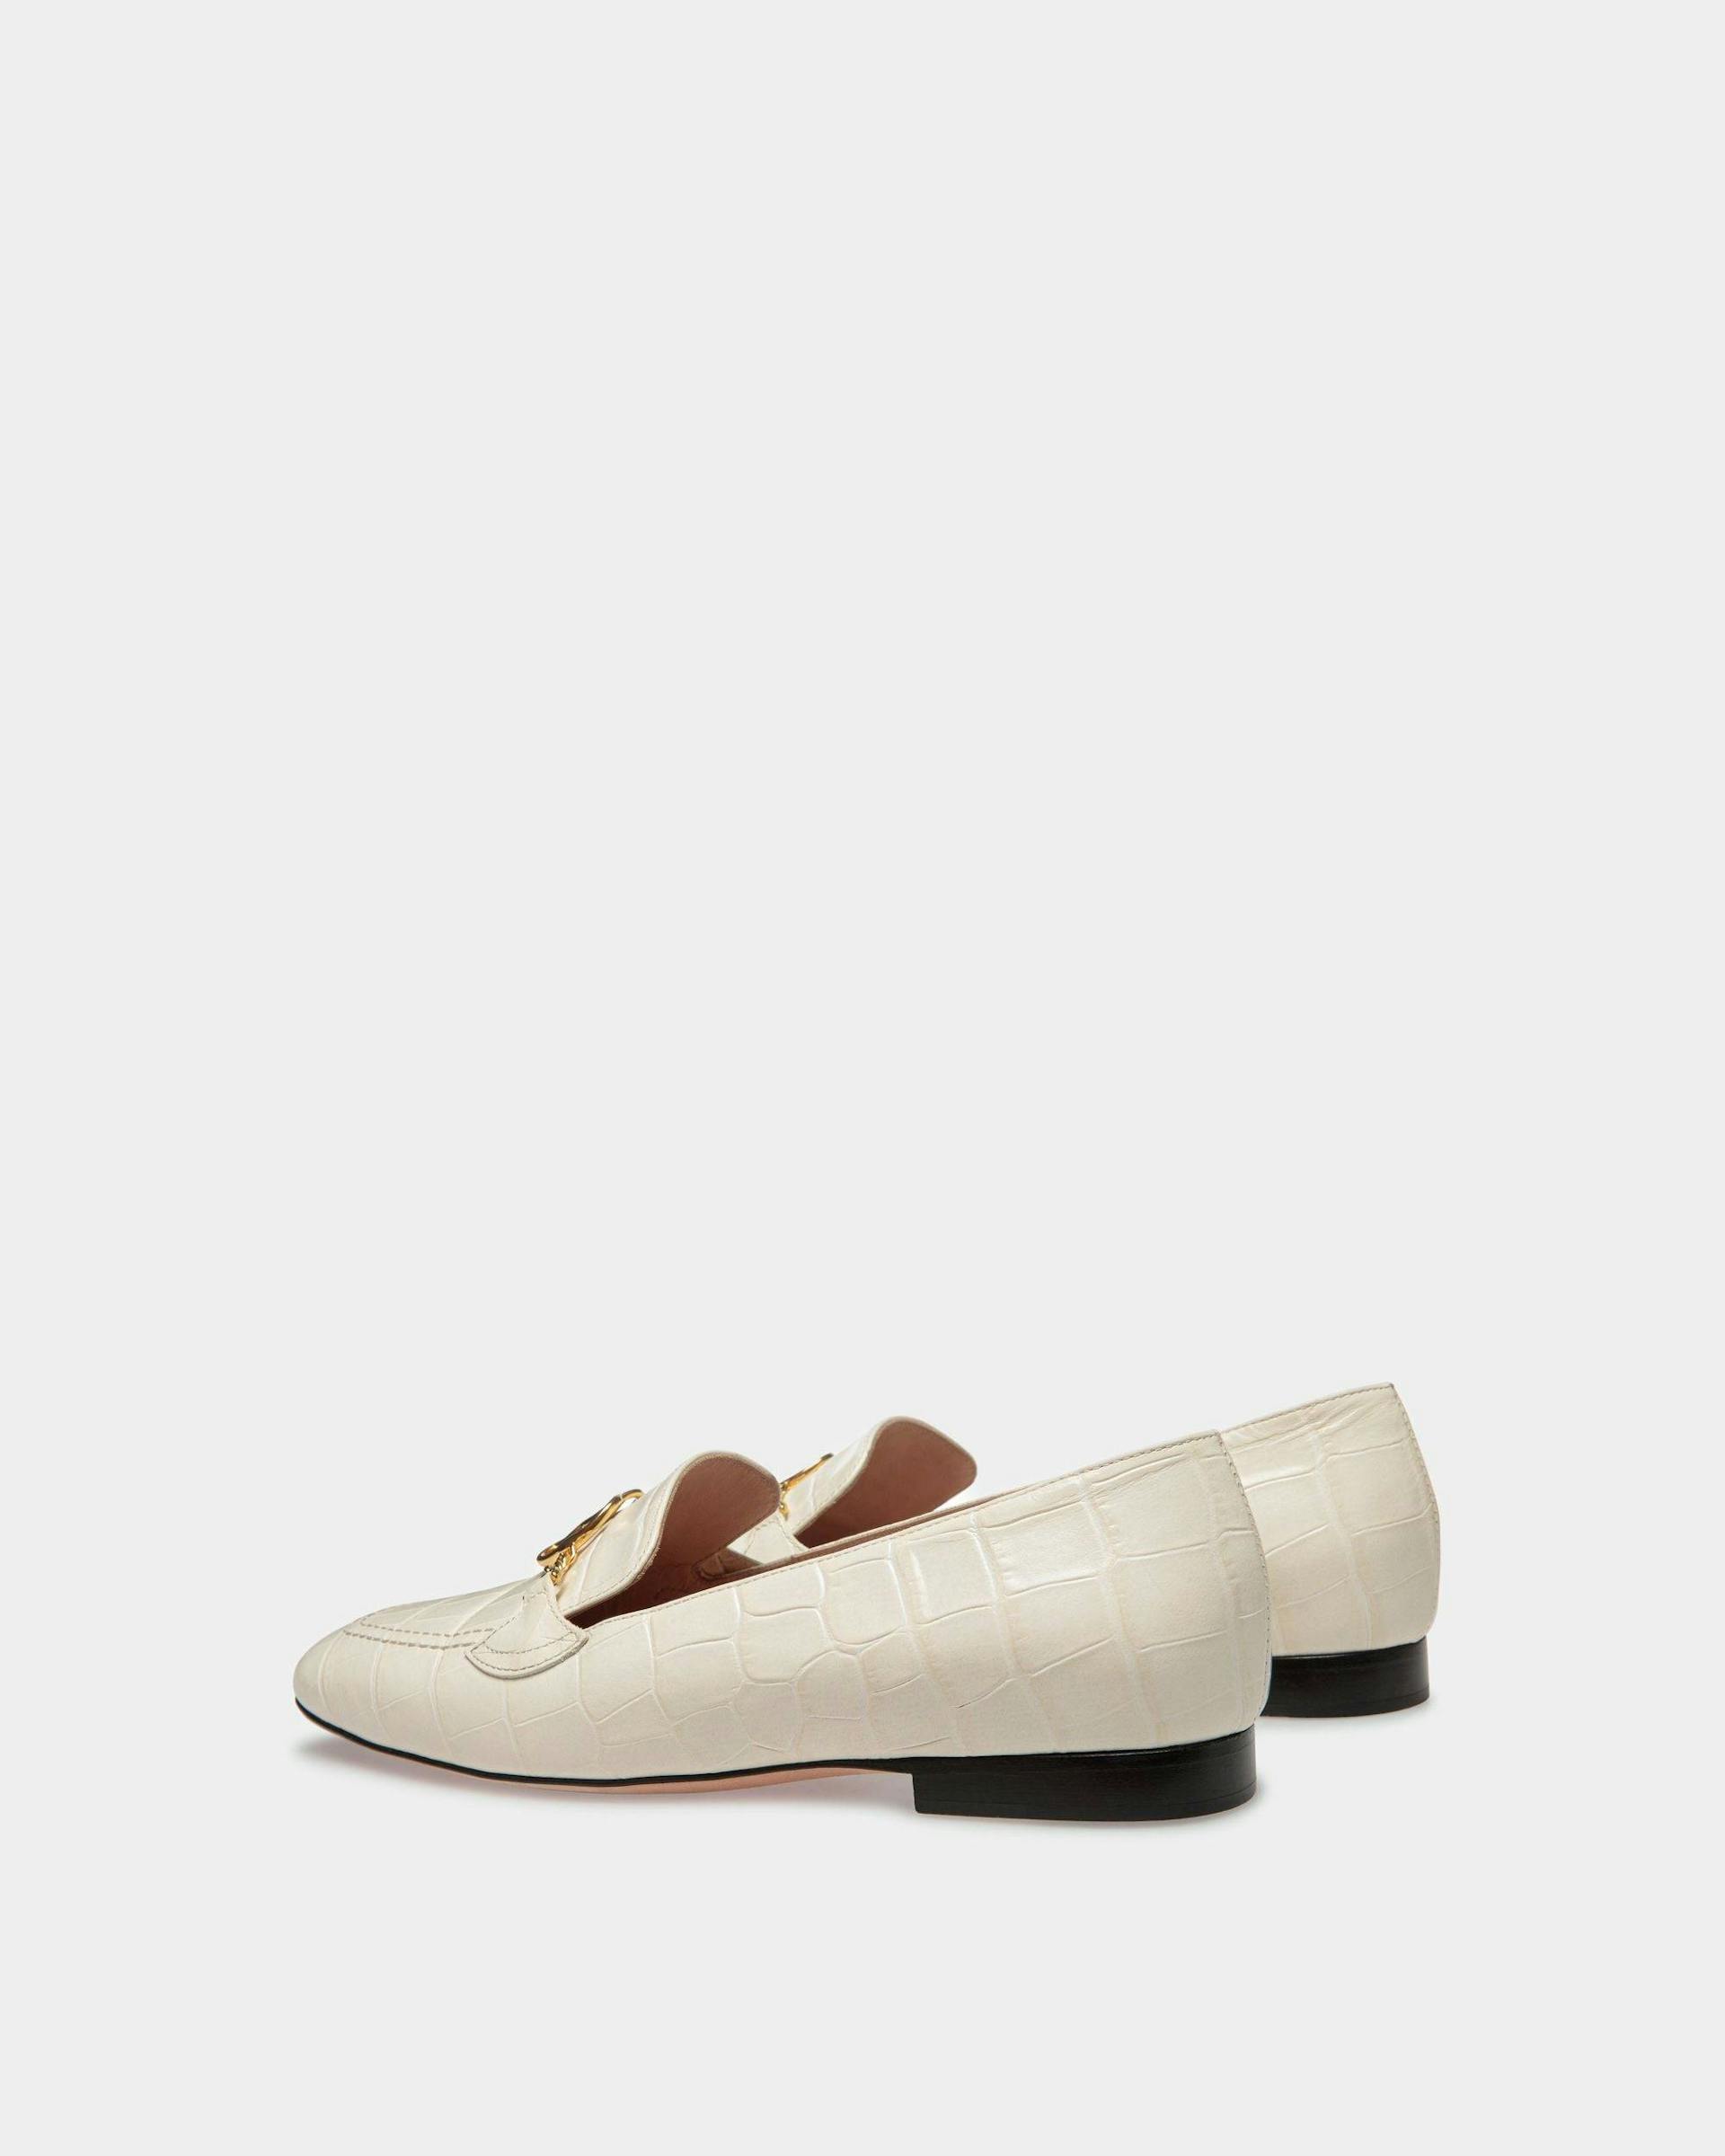 Daily Emblem Loafer In Bone Leather - Women's - Bally - 03